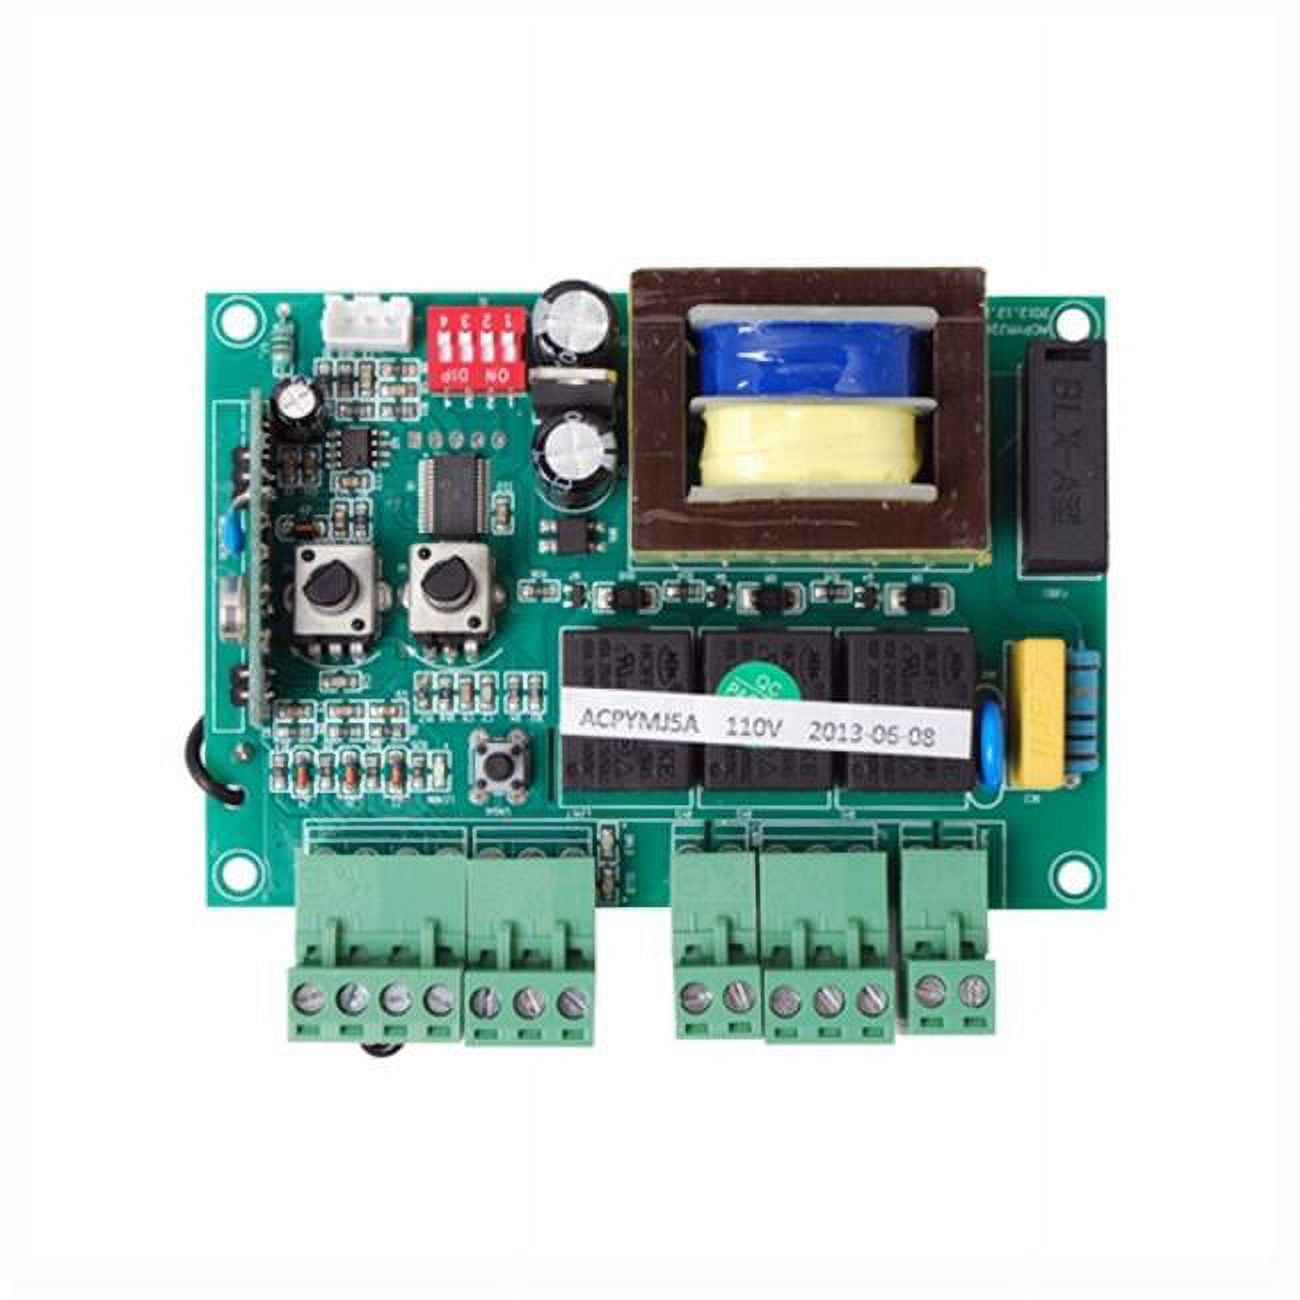 Picture of Aleko PCBAC2400-1500-UNB Circuit Control Board for Sliding Gate Openers Lockmaster AC2400-1500